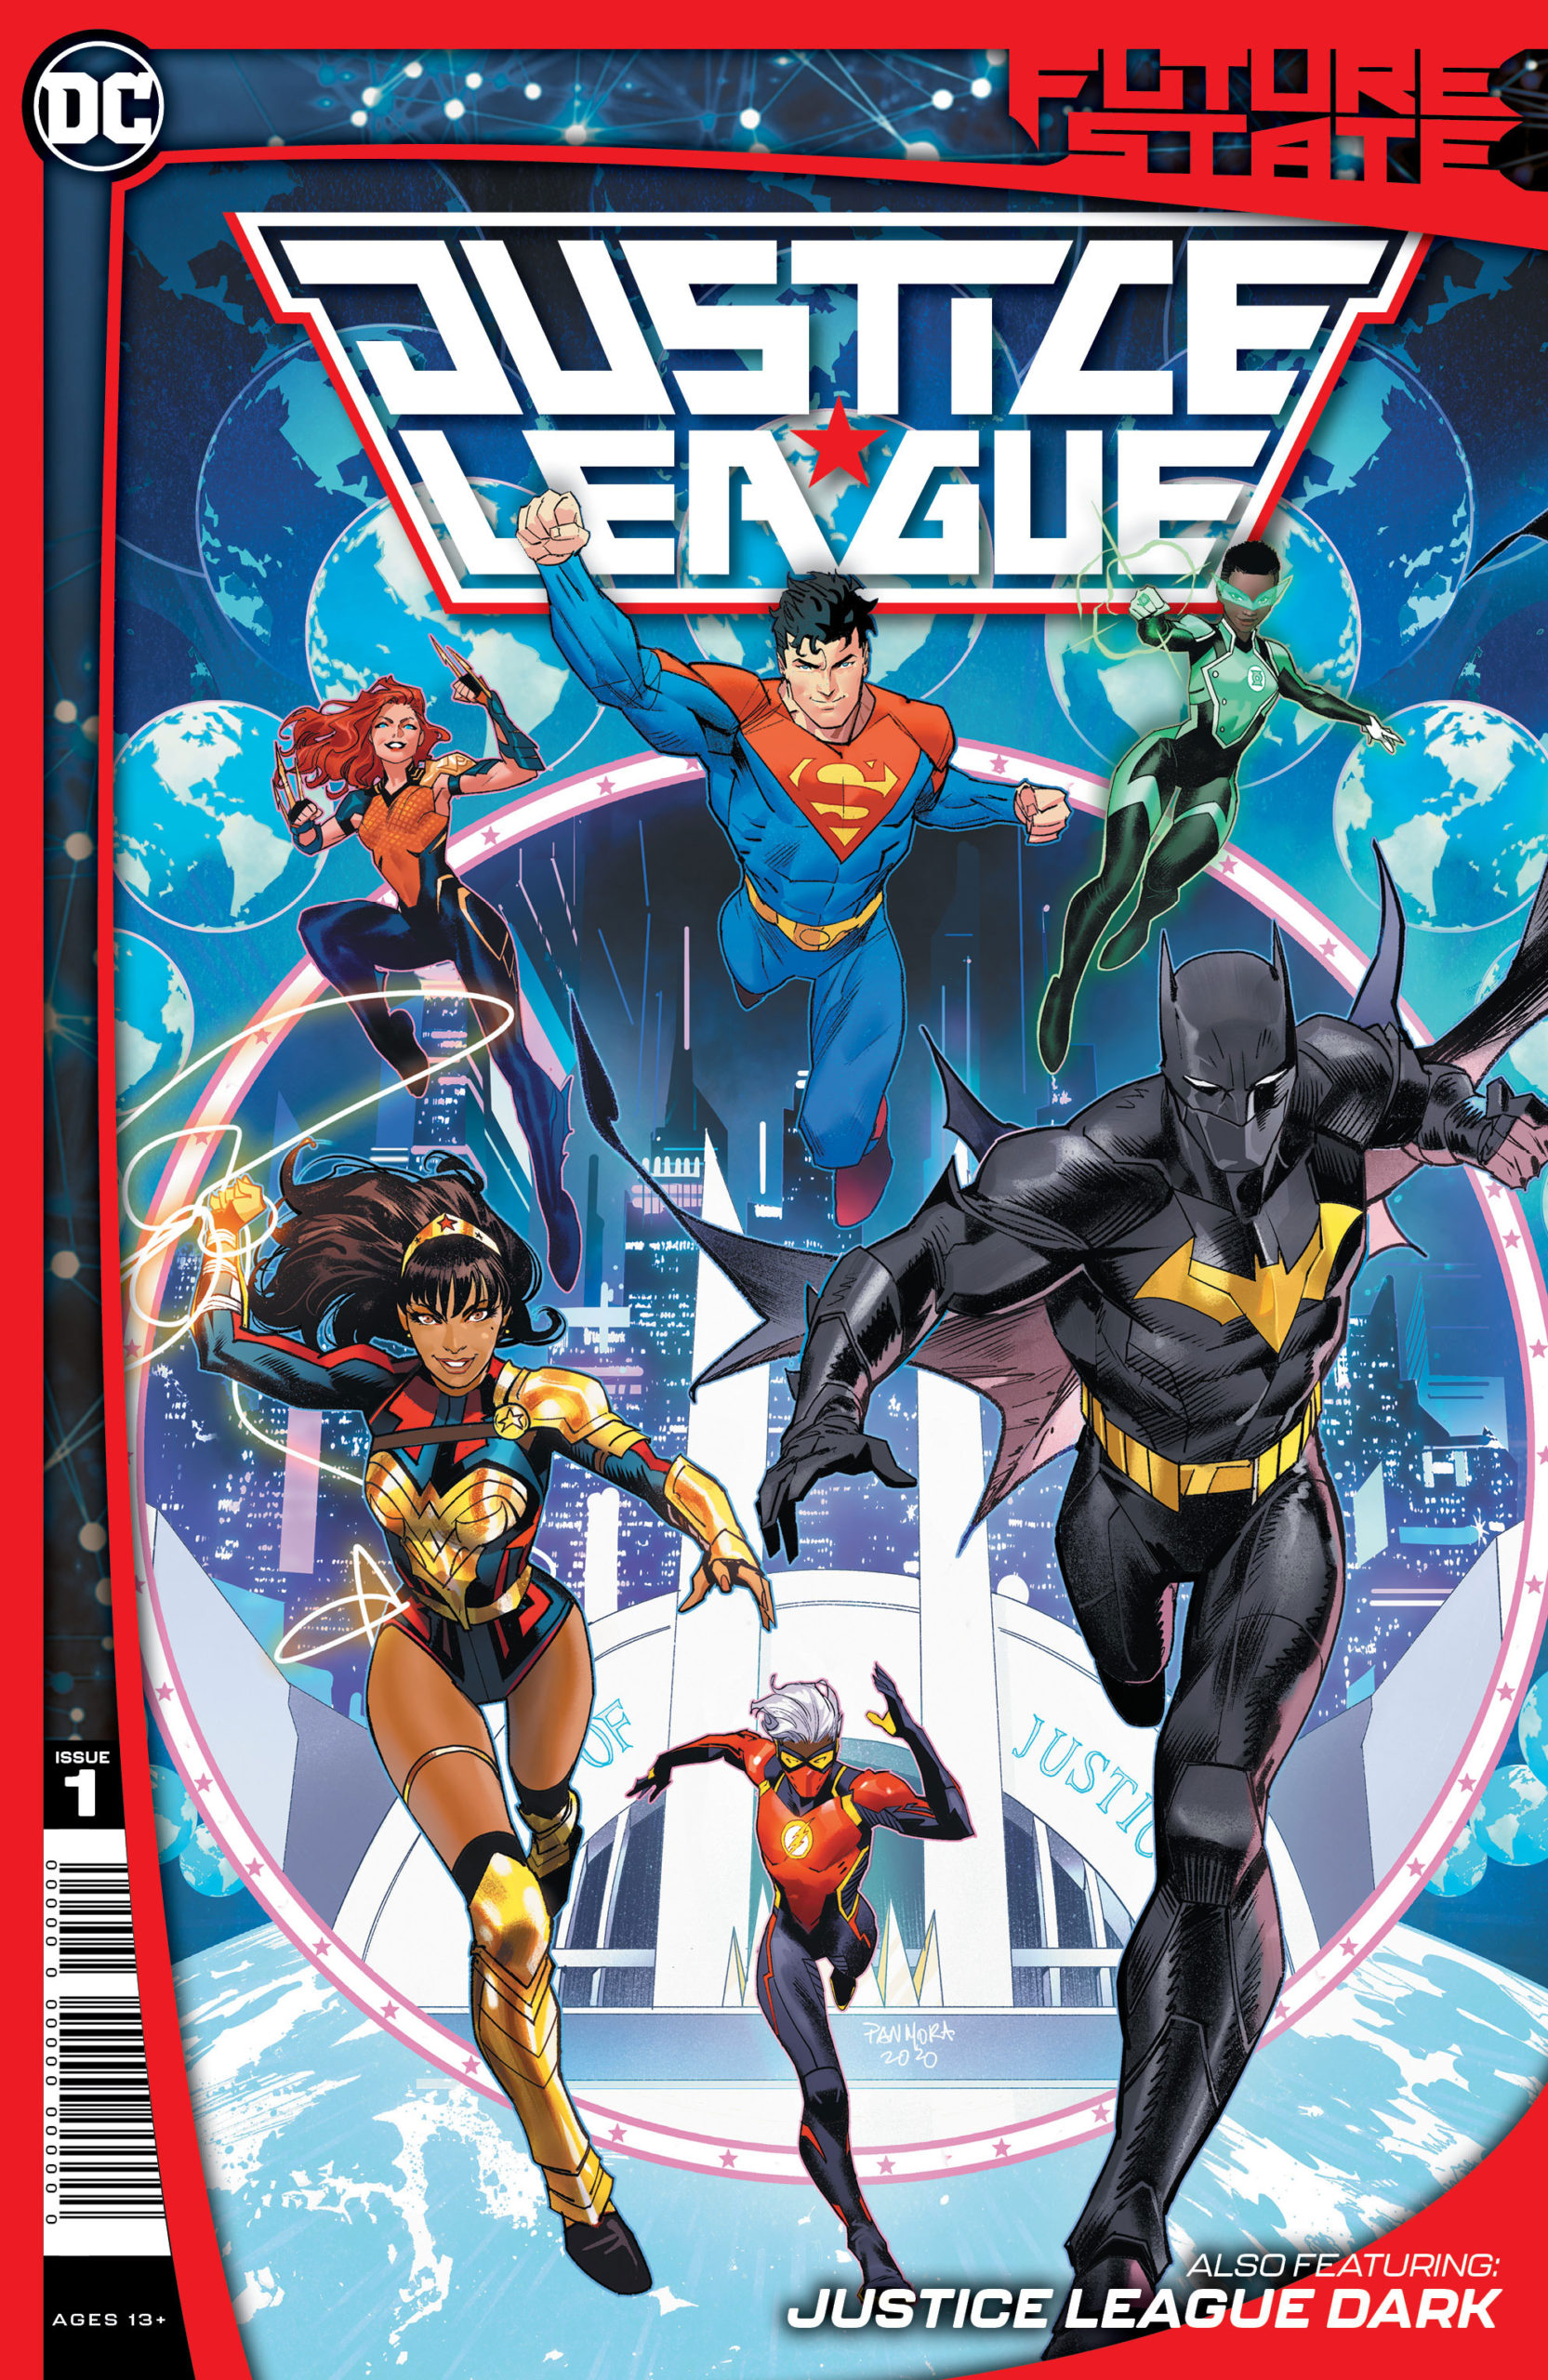 The Future State Justice League jumping into action on the cover of the first issue. Art by Dan Mora. 